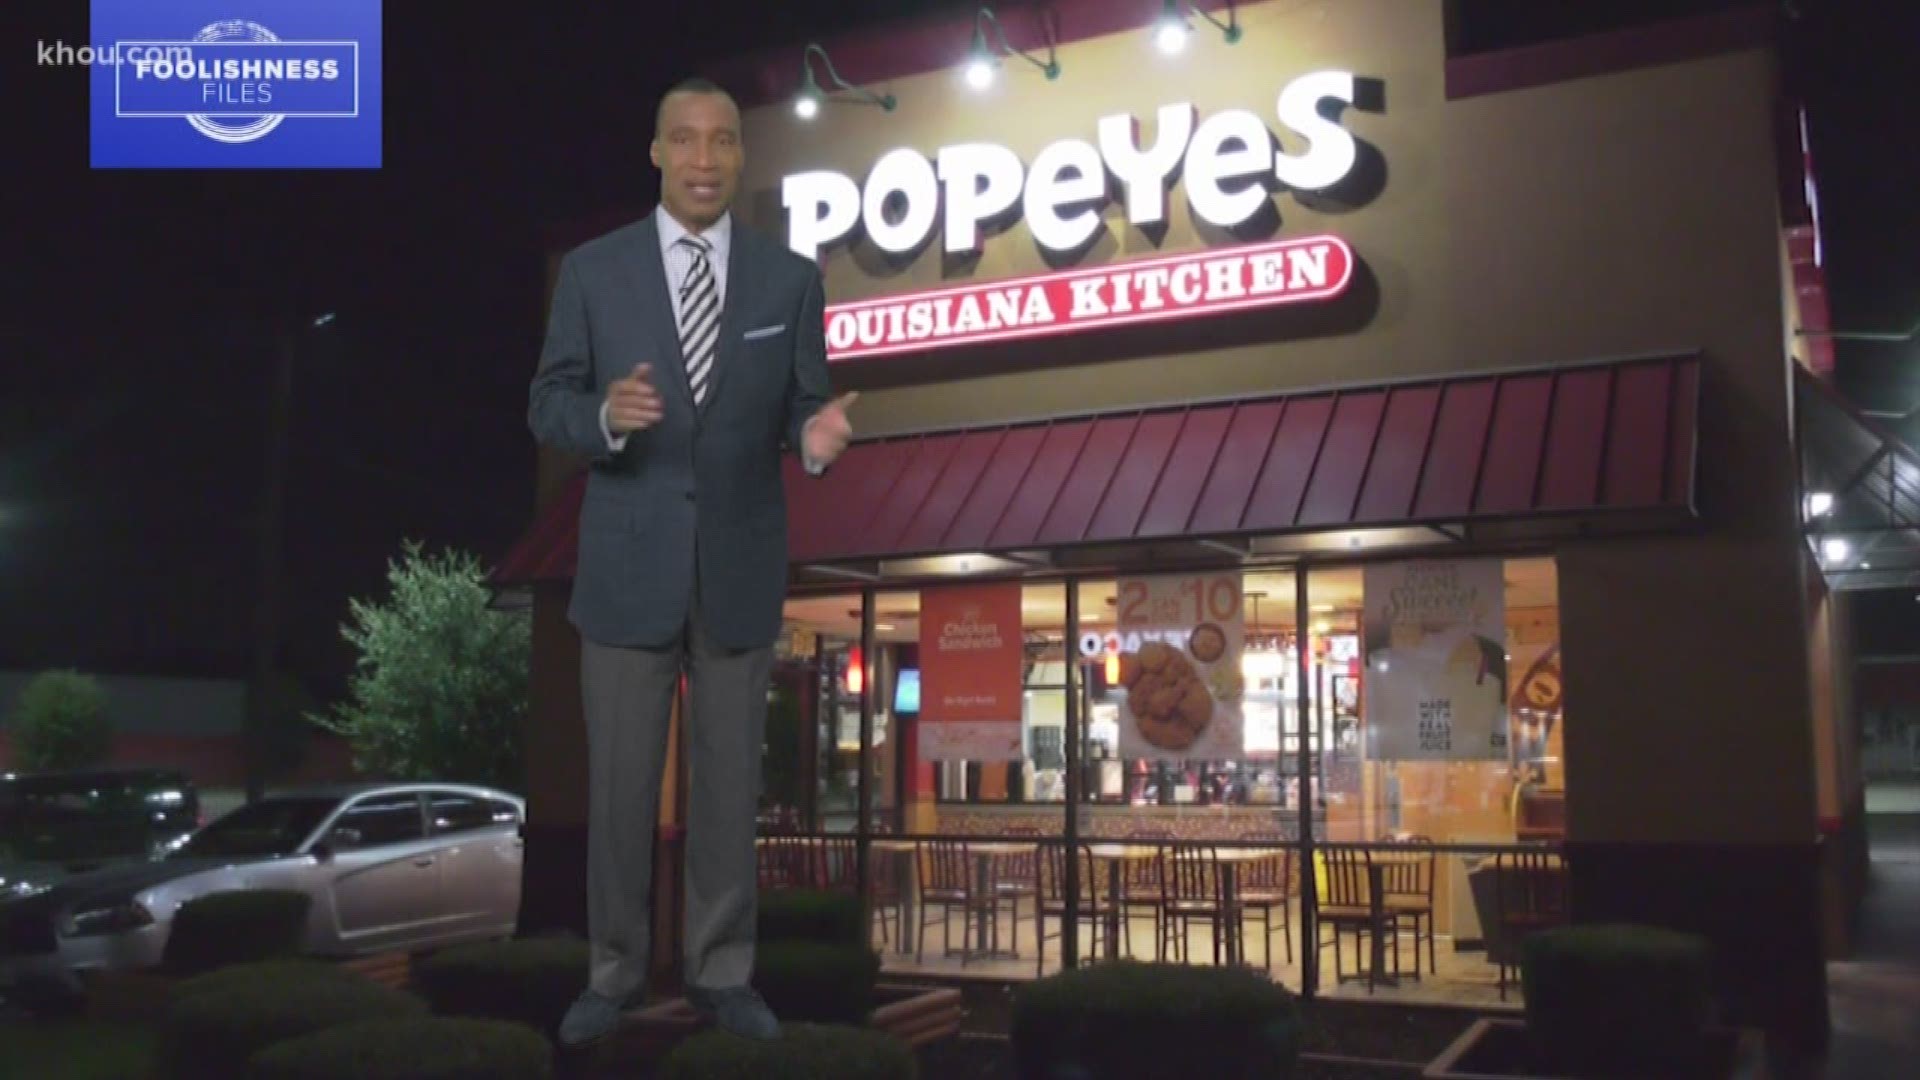 In foolish news, a man pulls a gun on Popeyes employees in Houston after the restaurant ran out of the new chicken sandwiches.